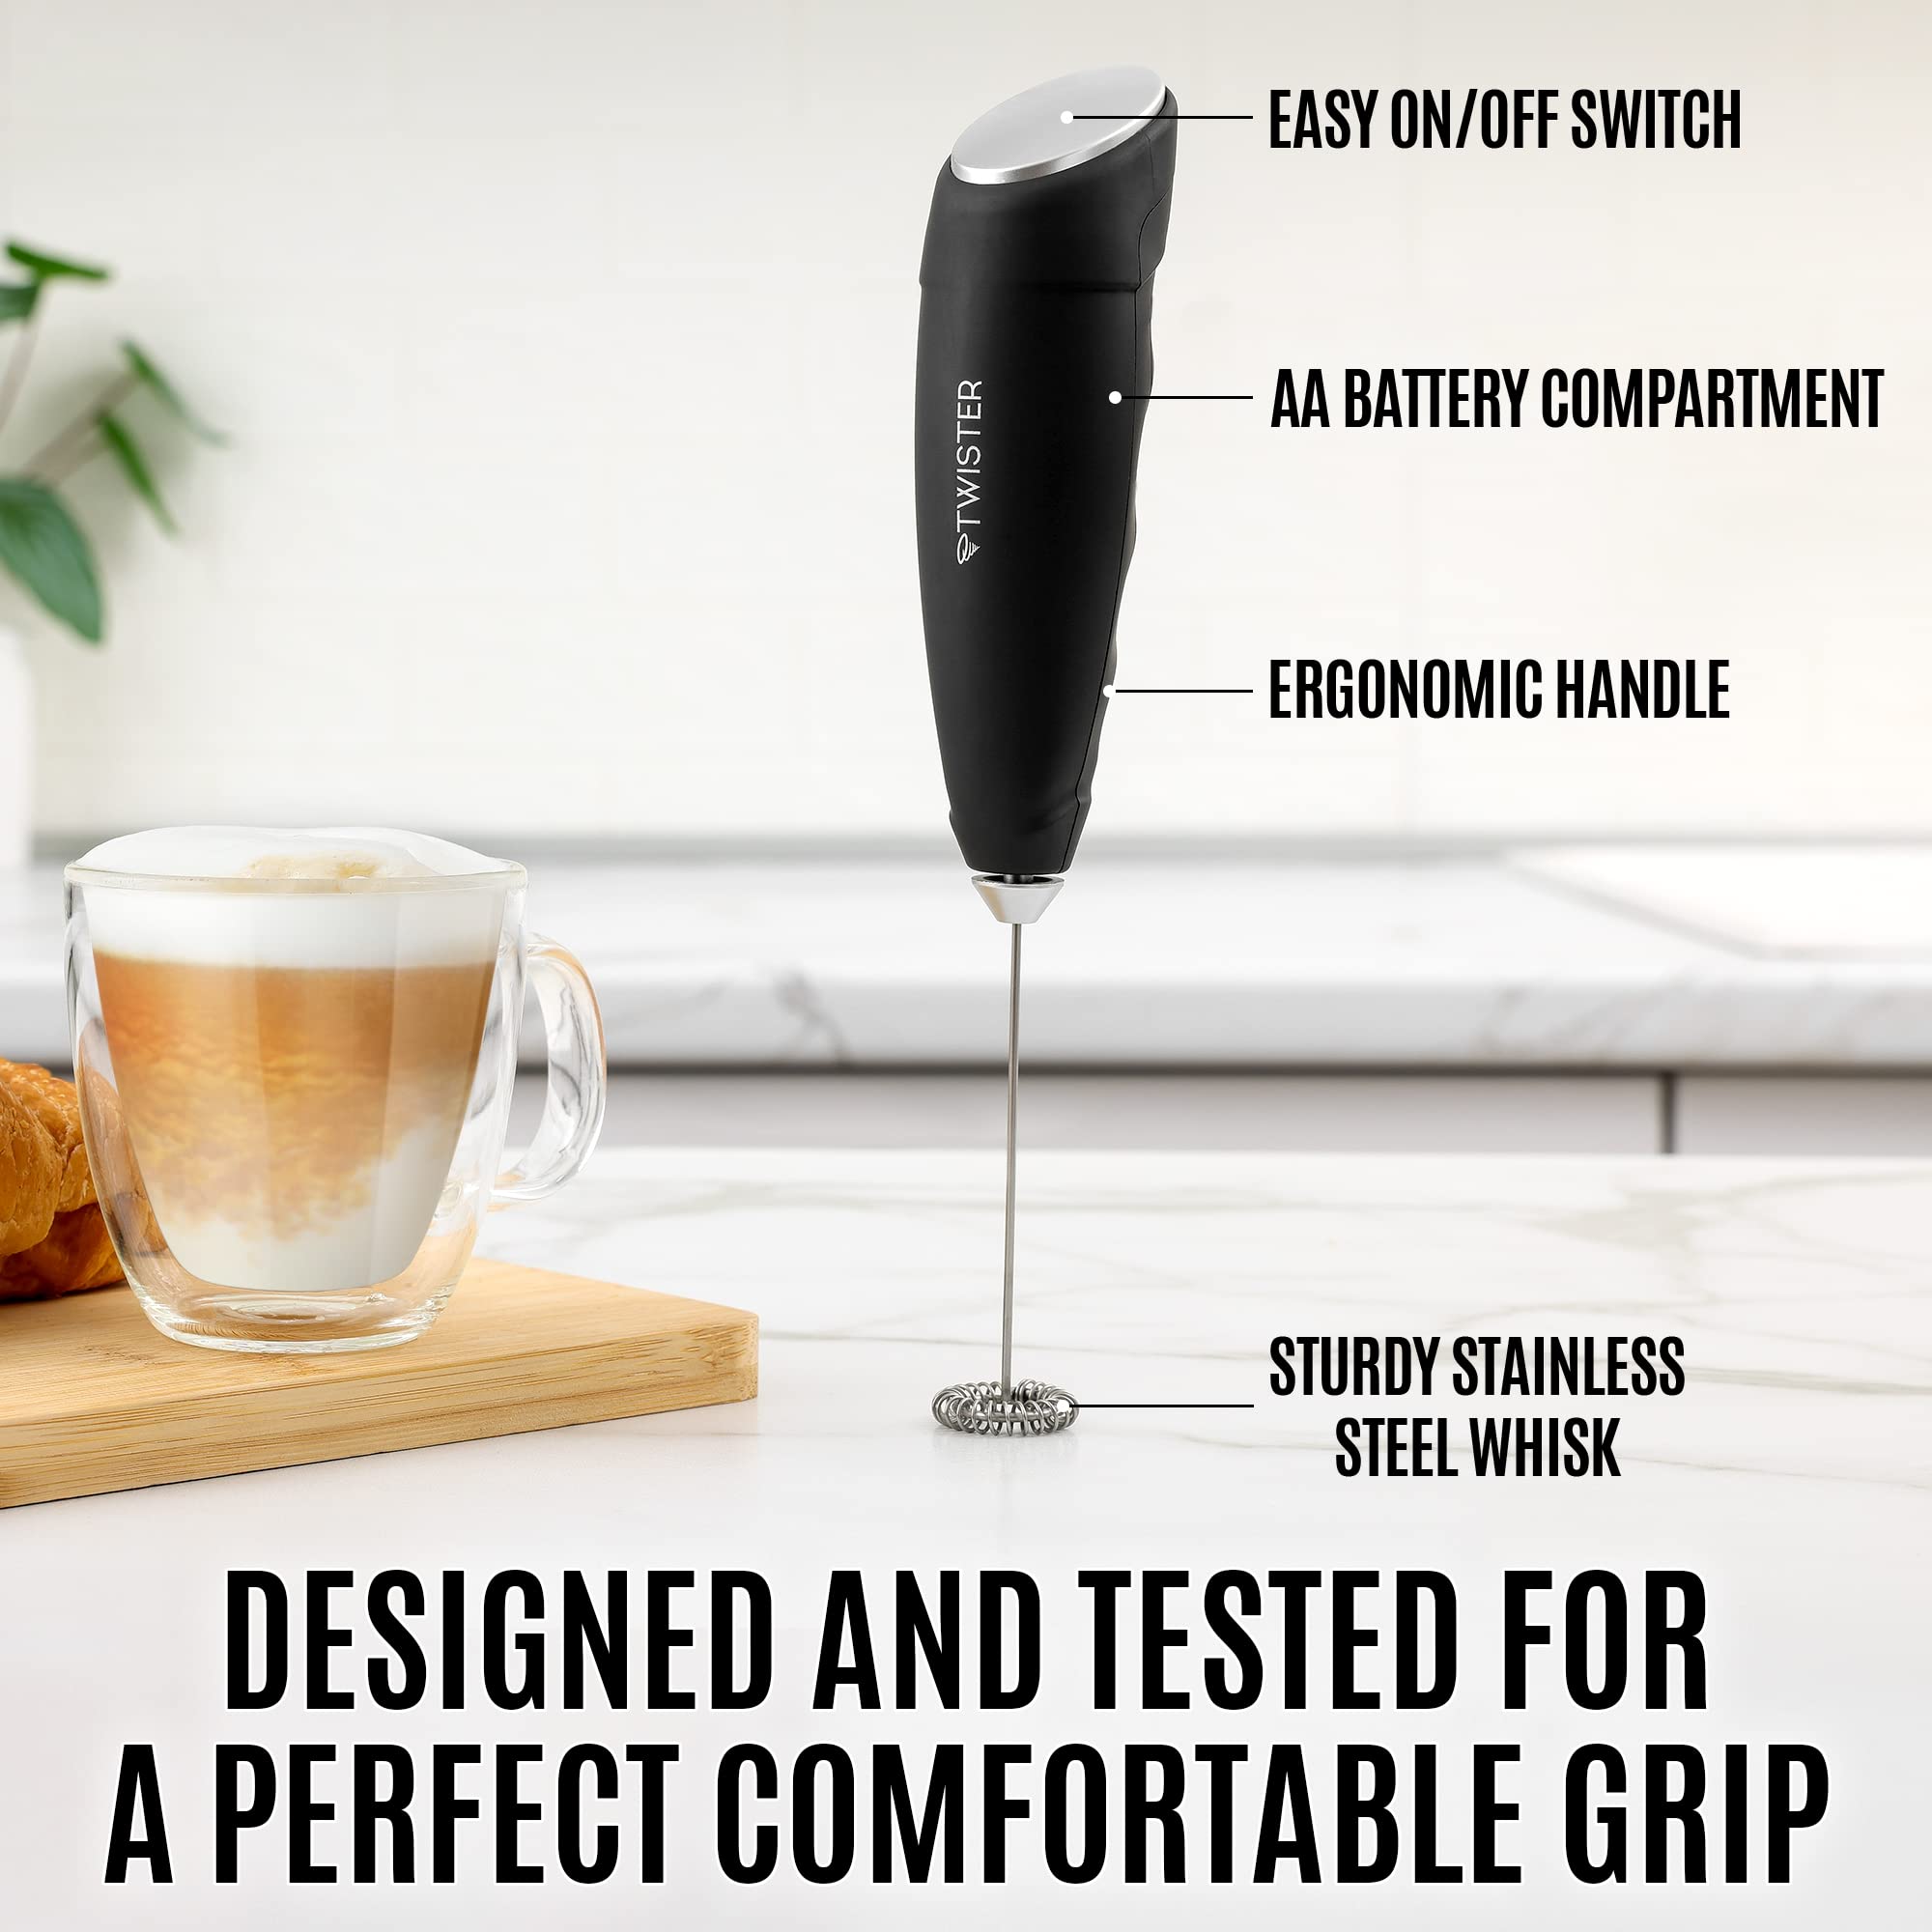 Zulay Kitchen Powerful Milk Frother Handheld - Easy-to-Grip Hand Mixer Electric - Twister-Design Mini Mixer for Powder Drinks - Coffee Frother Handheld & Mixer Electric Handheld - (Black/Silver)